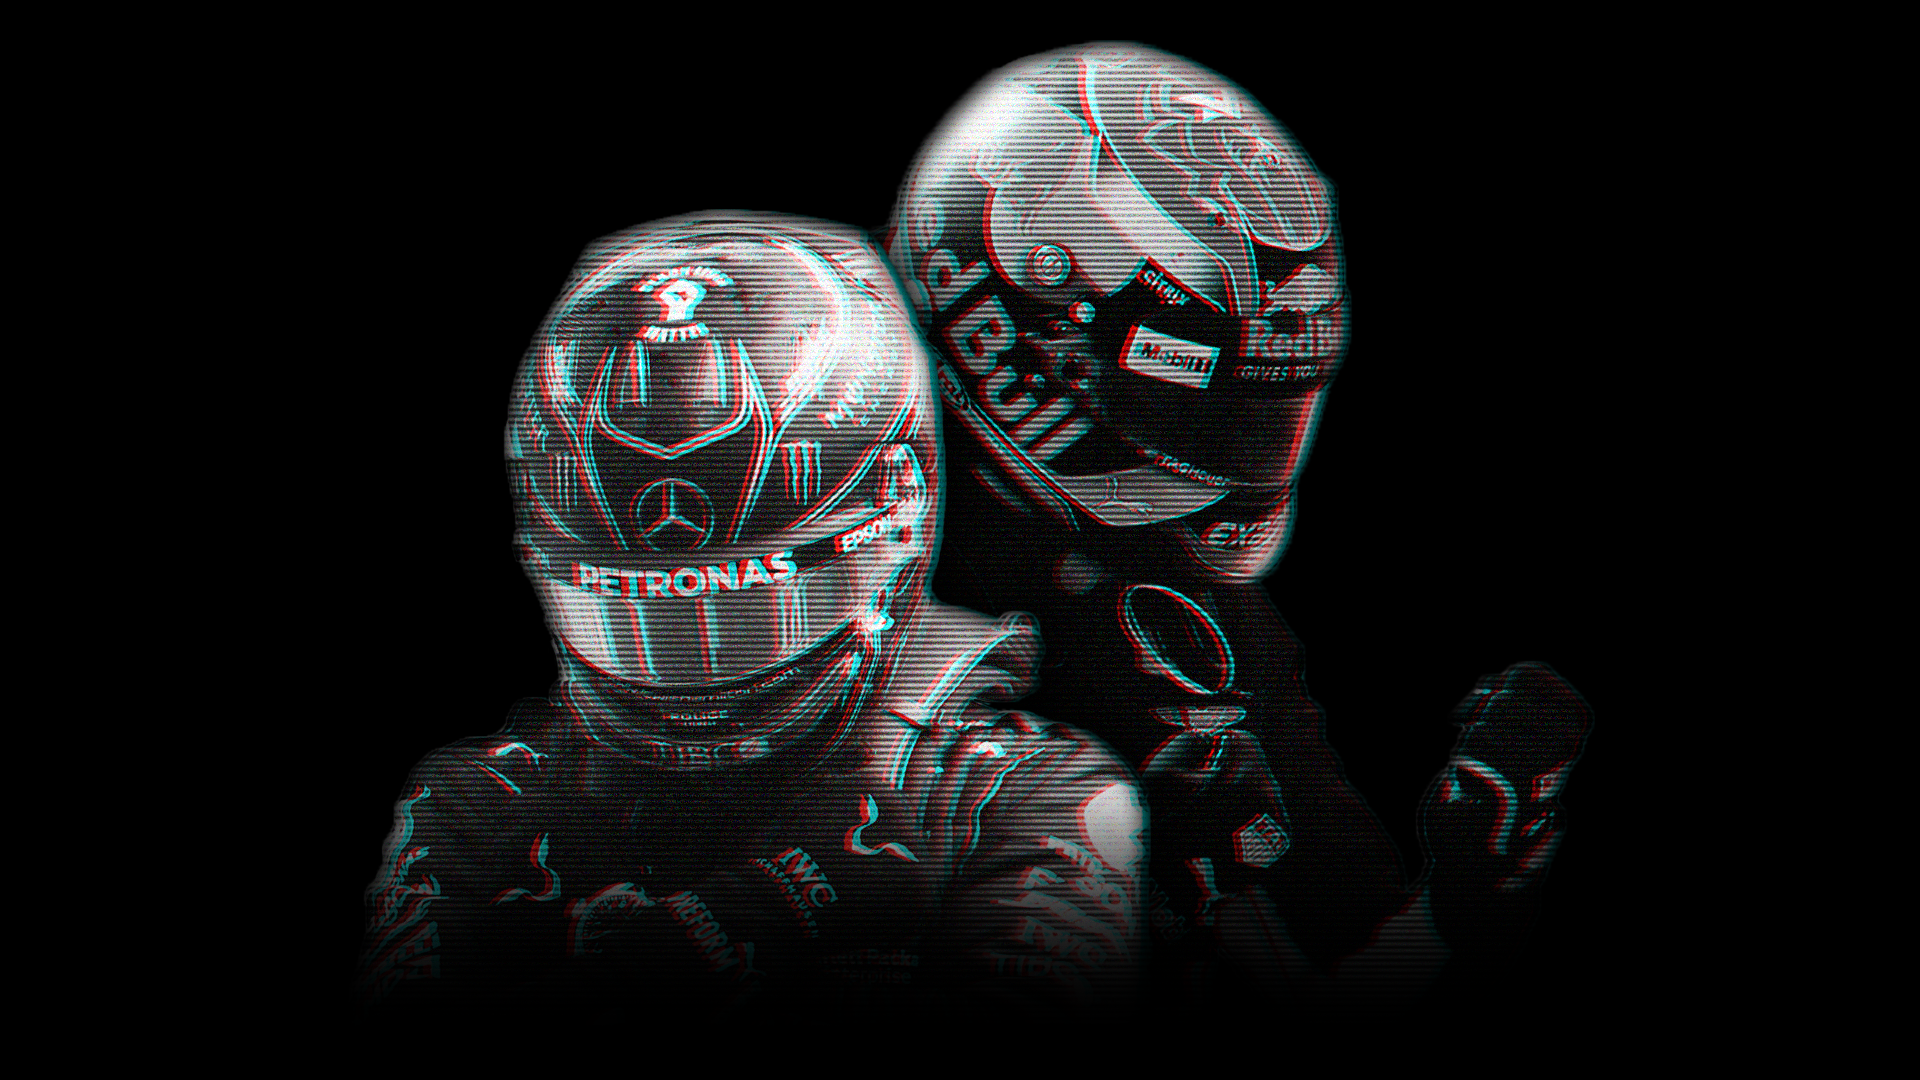 Lewis Hamilton and Max Verstappen HD Wallpaper | Background Image